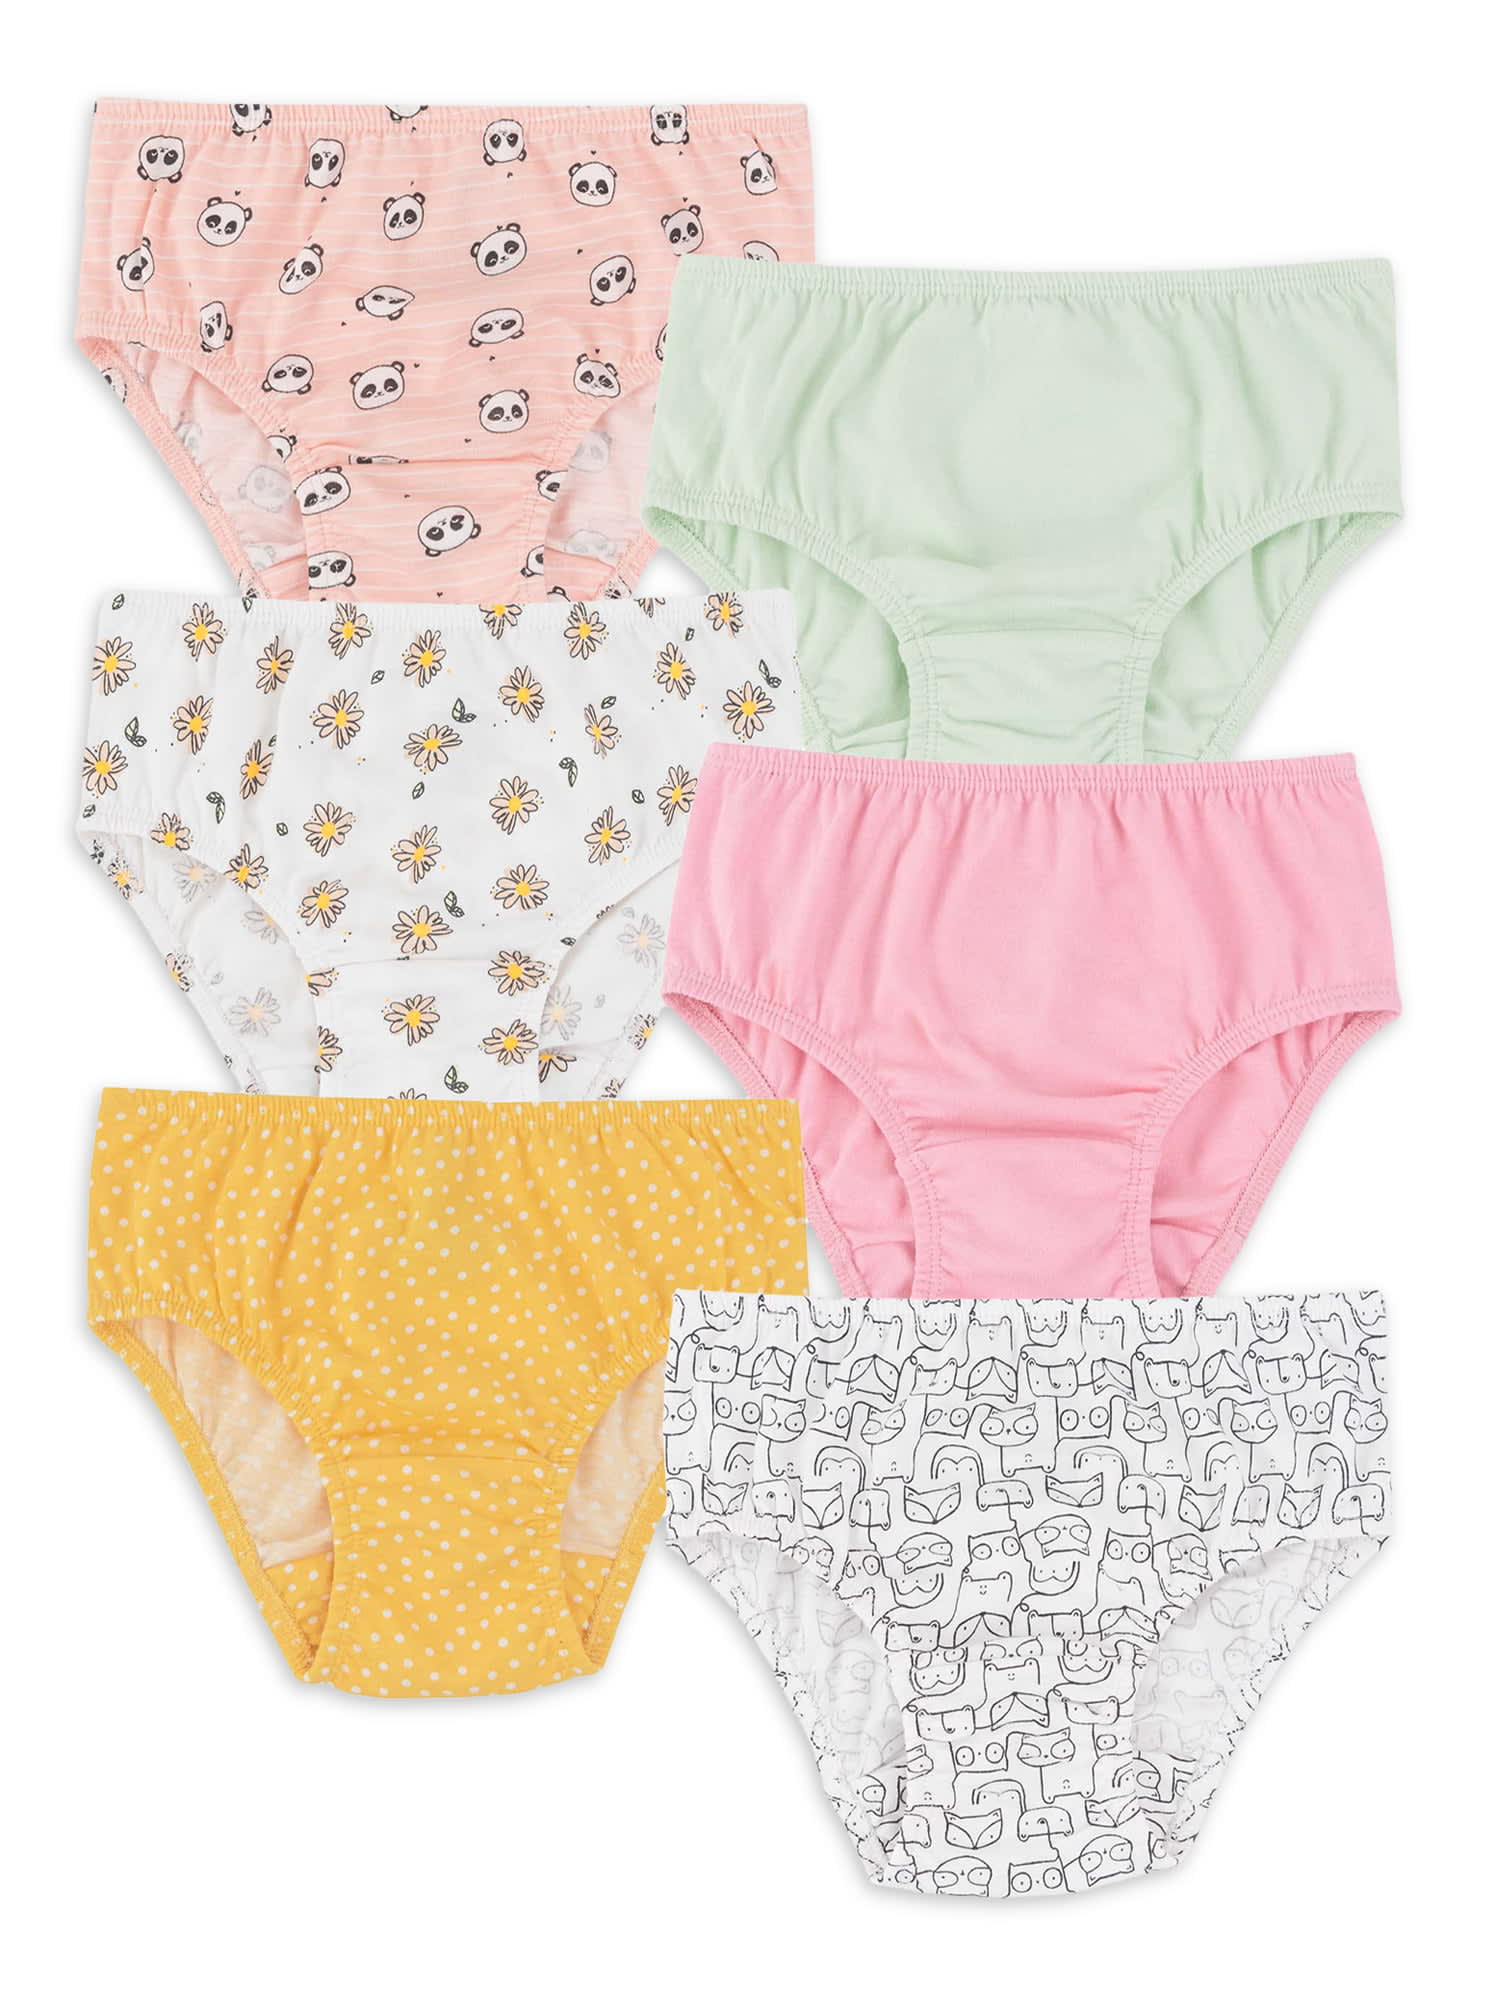 Minnie Mouse Toddler Girls' Panties, 6 pack Sizes 2T-4T 